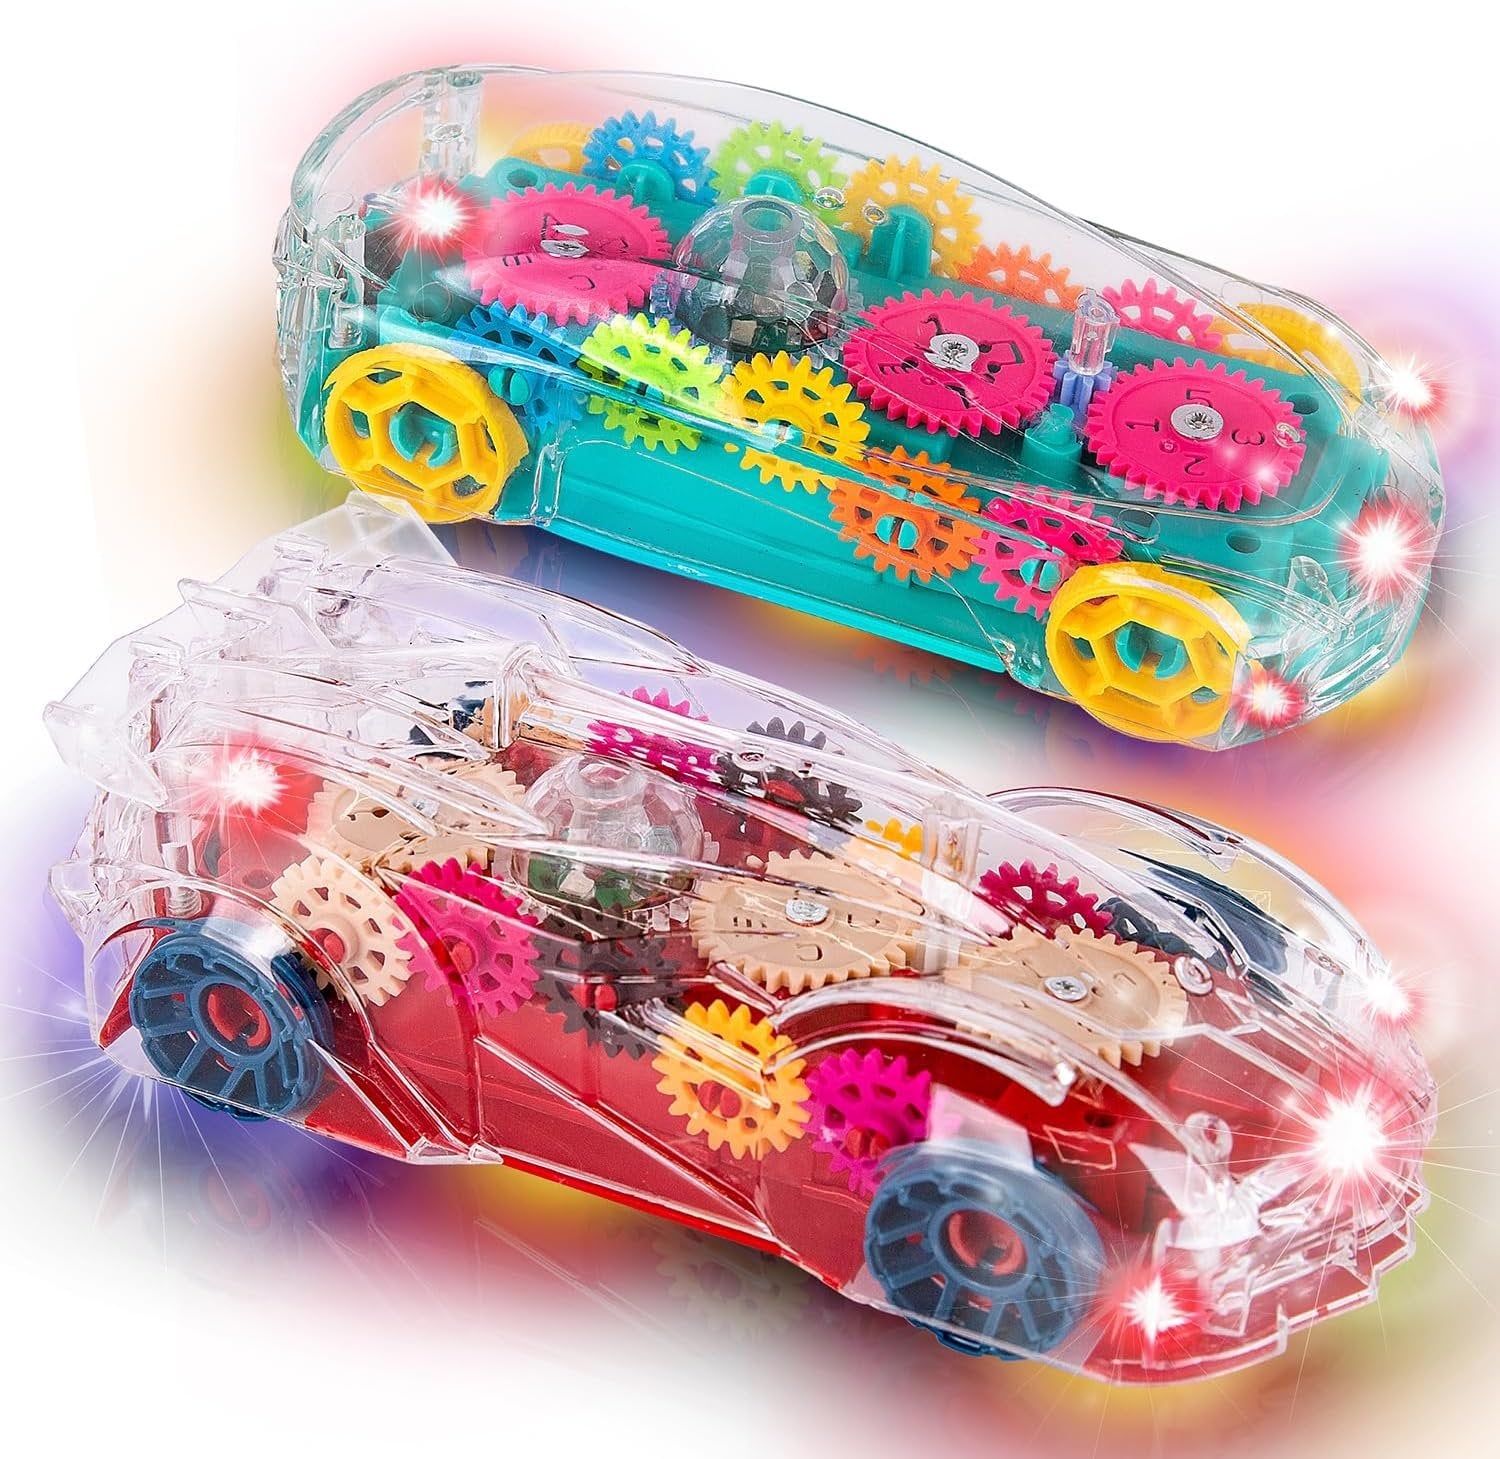 Light Up Transparent Toy Cars for Kids, Set of 2, Bump and Go Toy Cars with Colorful Moving Gears, Music, and LED Effects, Fun Educational Toy for Kids, Great Birthday Gift Idea